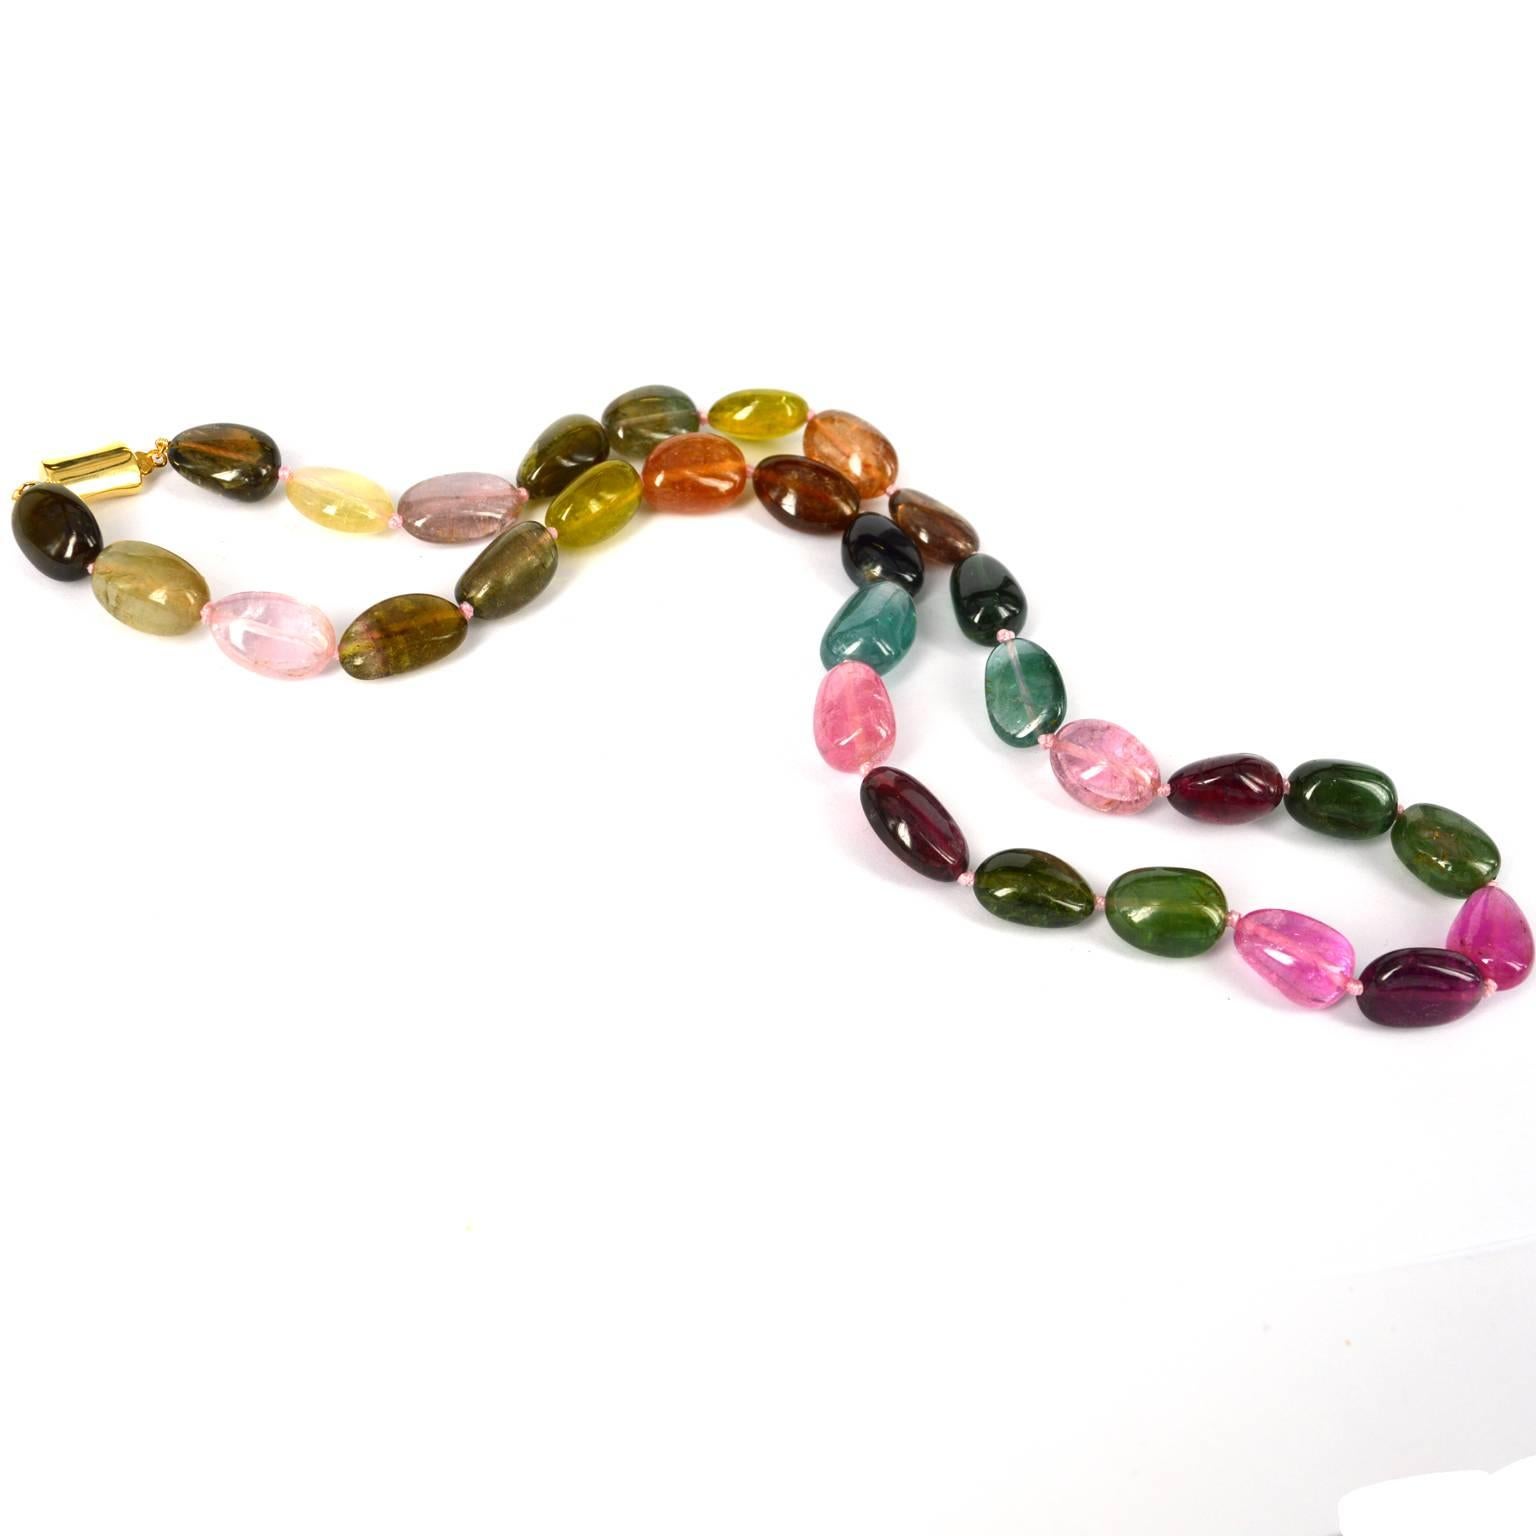 Stunning large natural Tourmaline nugget necklace, each stone is 14-17mm by 11mm hand knotted with a 13x7mm 9ct Gold Clasp.